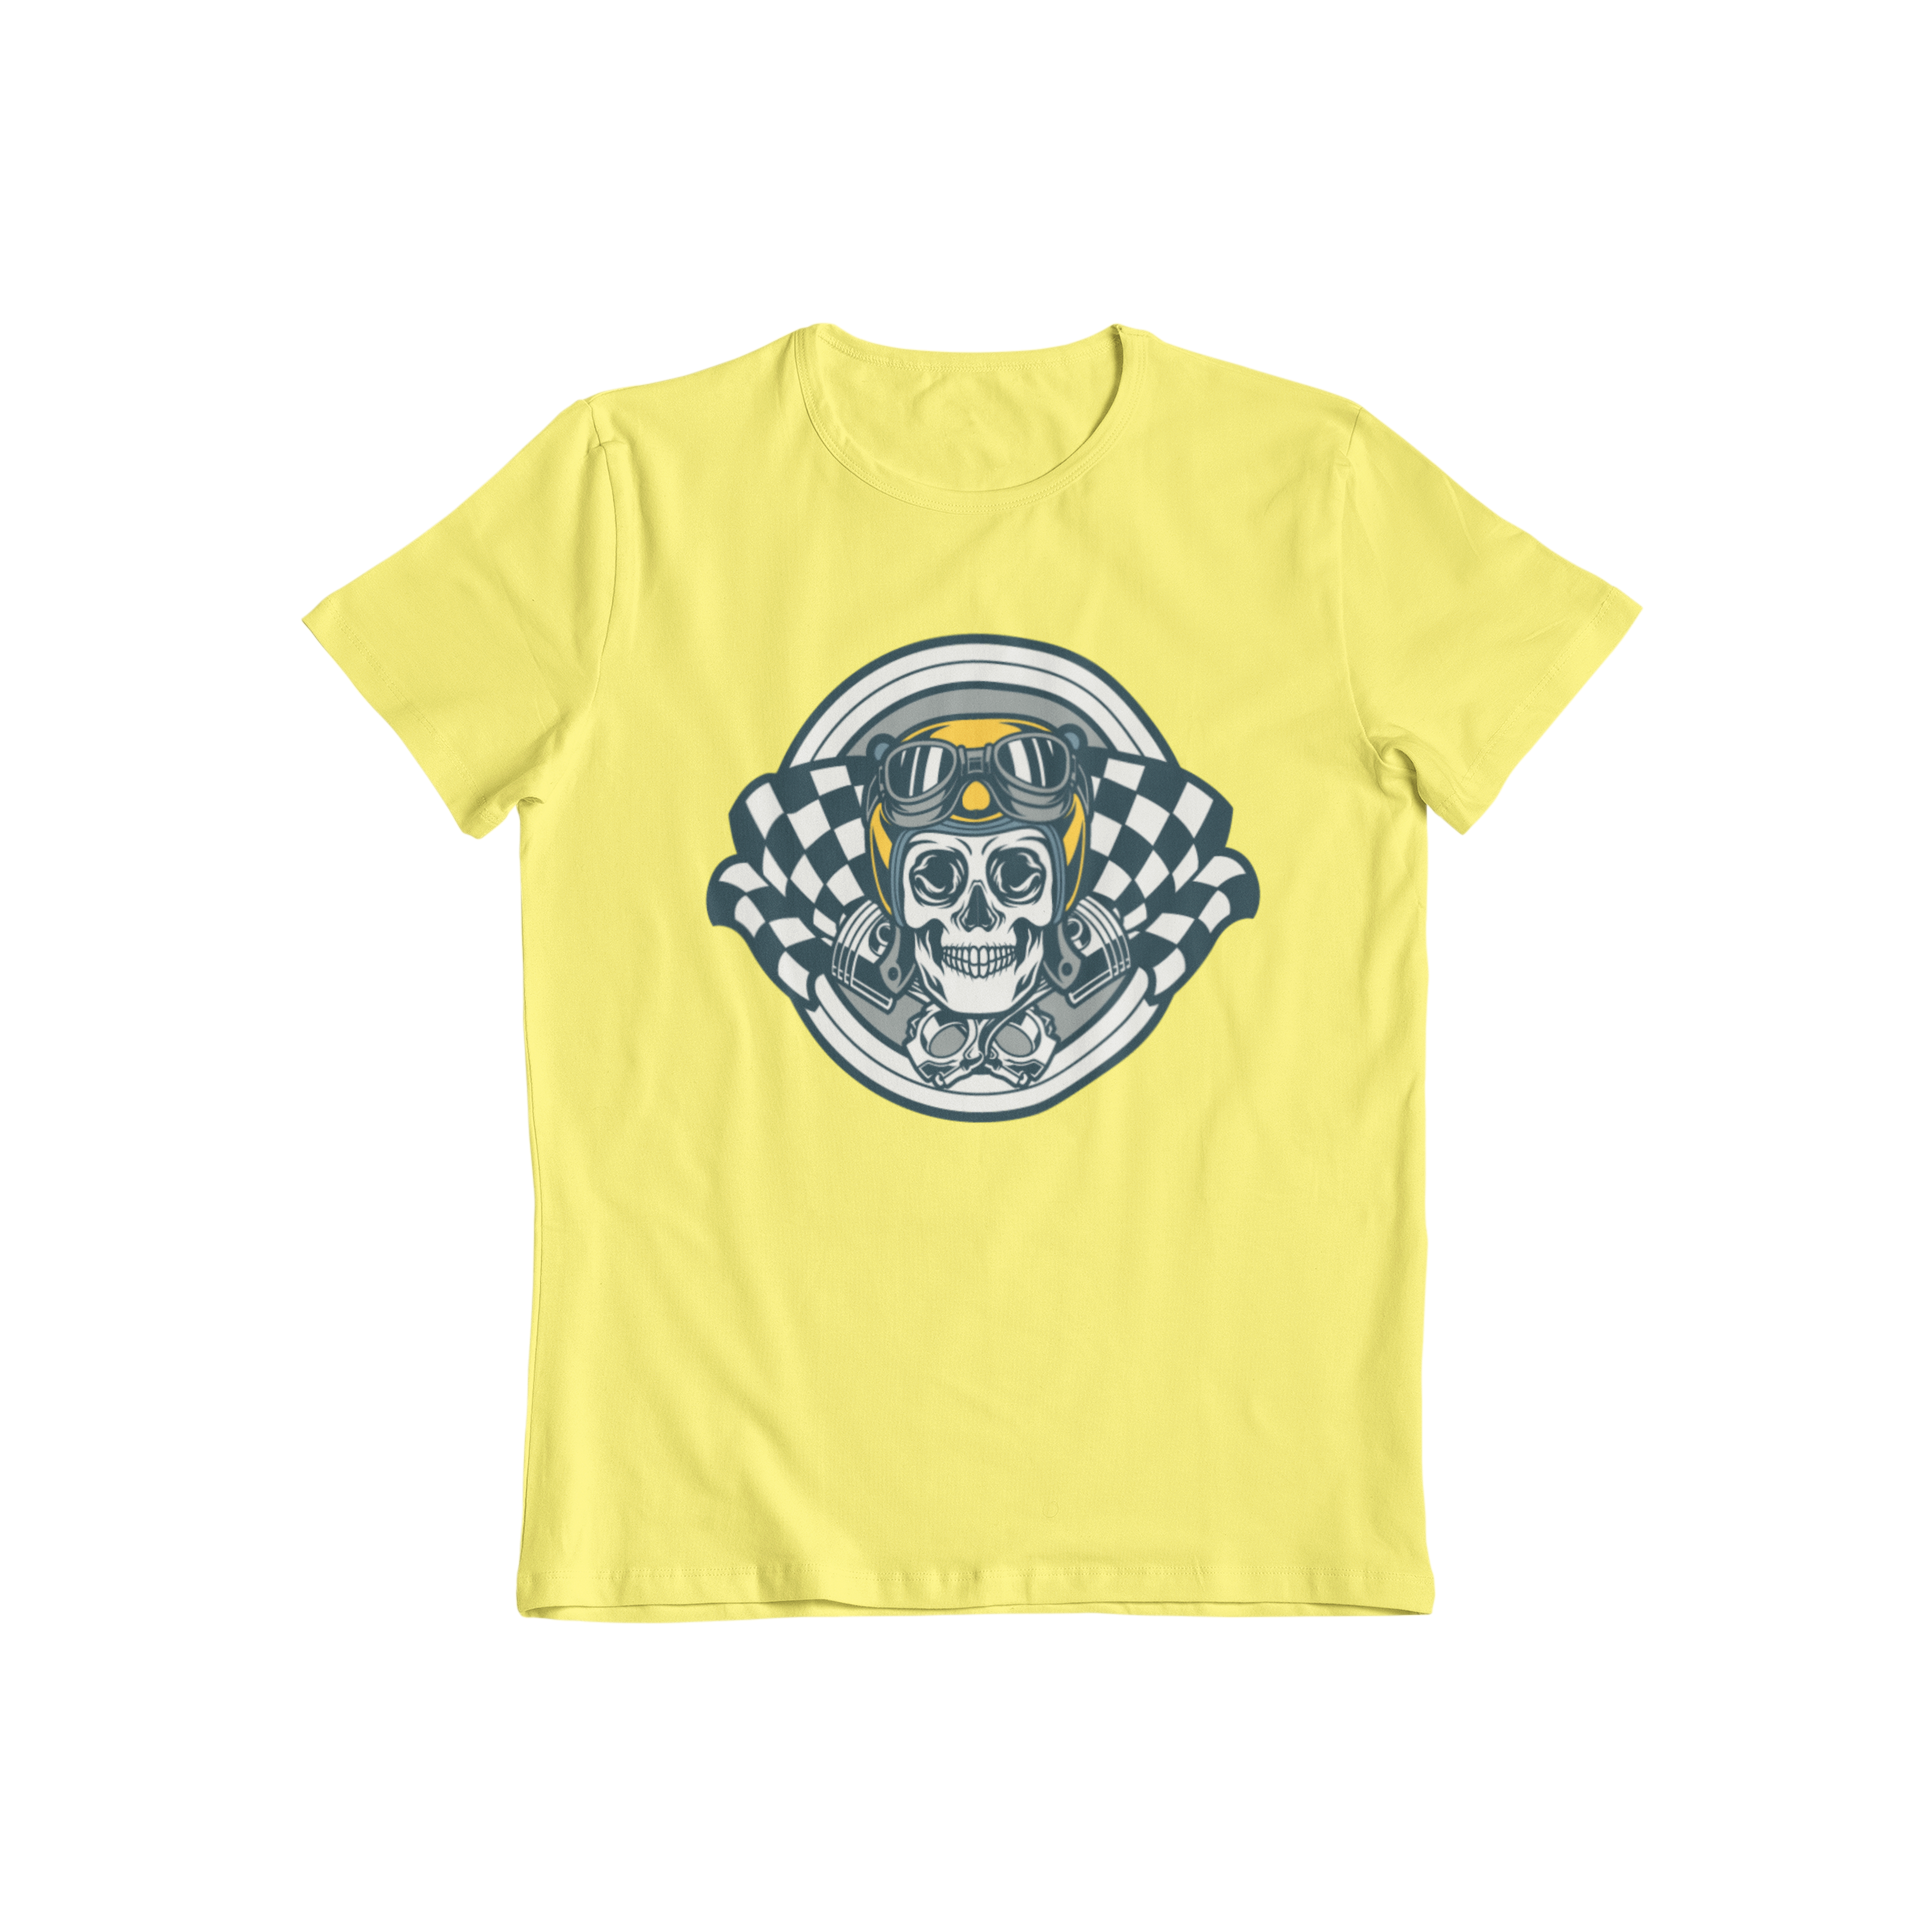 Looking for a new graphic tee that represents your love for cars? Check out Teevolution! Our automotive graphic tee features a skull wearing an open face helmet with pistons and checkered flags. Get your hands on our unique and high-quality t-shirts today!